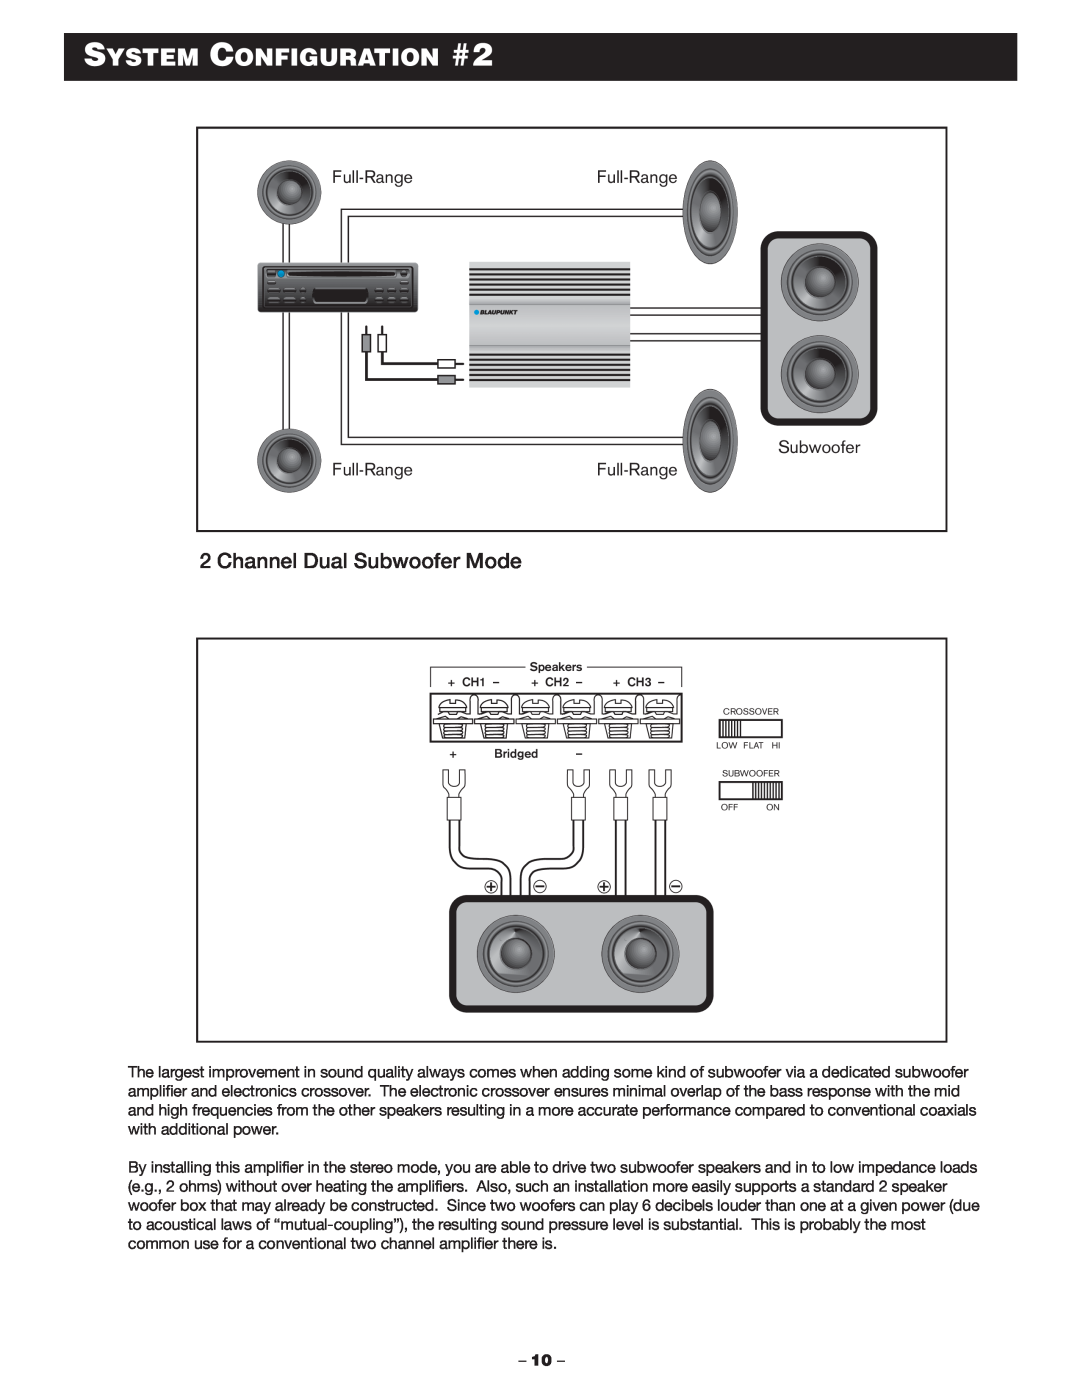 Blaupunkt MPA 400US manual SYSTEM CONFIGURATION #2, Channel Dual Subwoofer Mode 